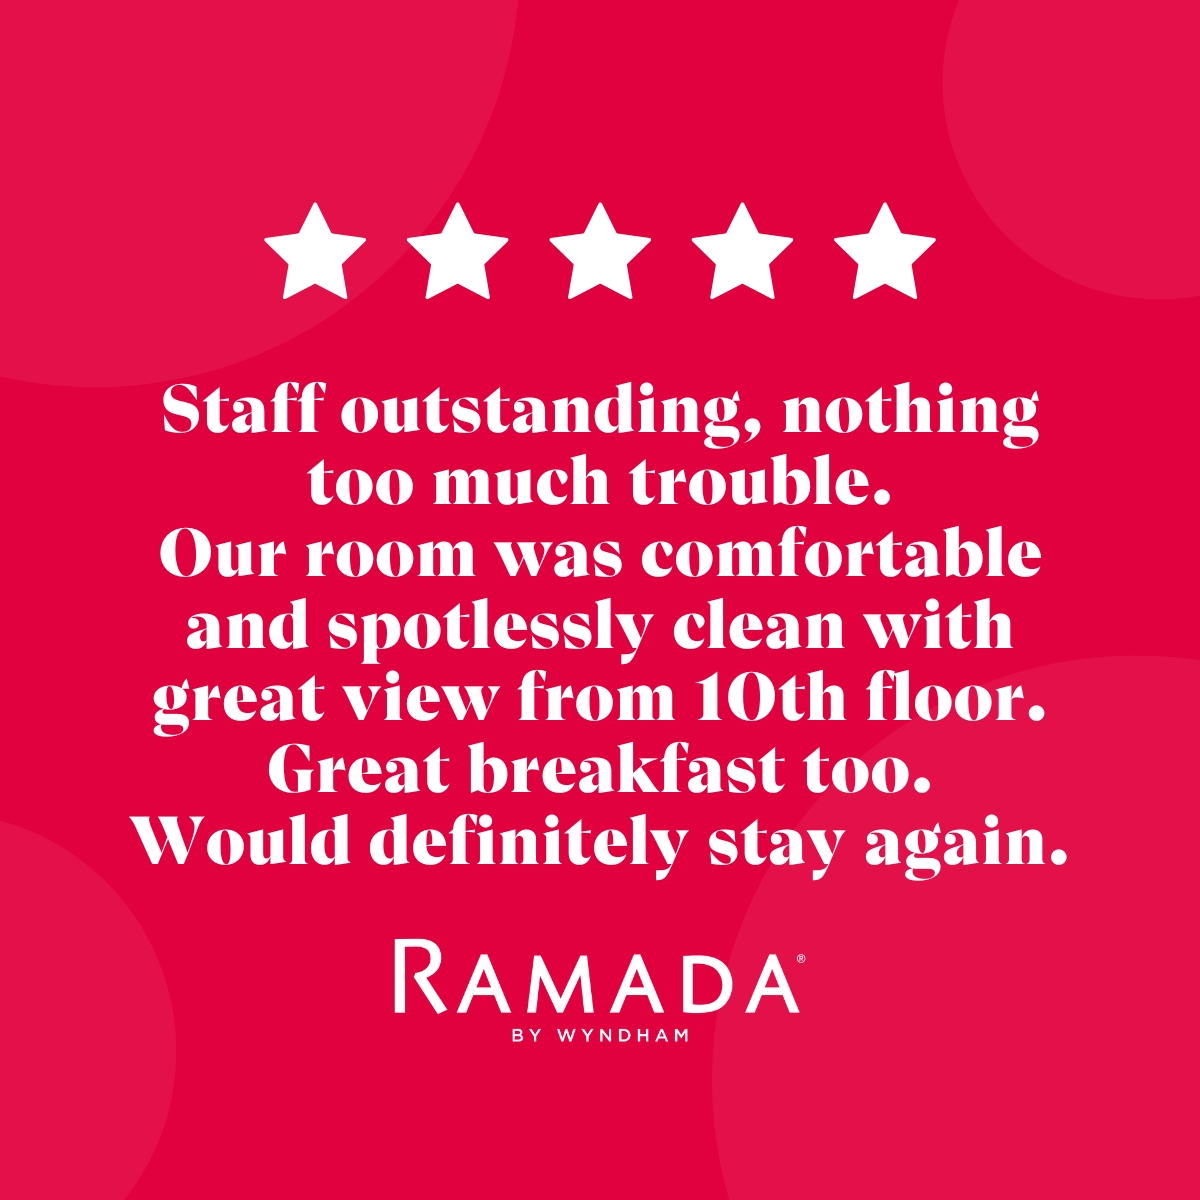 Another fabulous review! 🥰 Your amazing reviews light up our day and inspire us to deliver even better experiences. If you're looking to book your next stay, head to our website! ❤️ #RamadaCoventry #Coventry